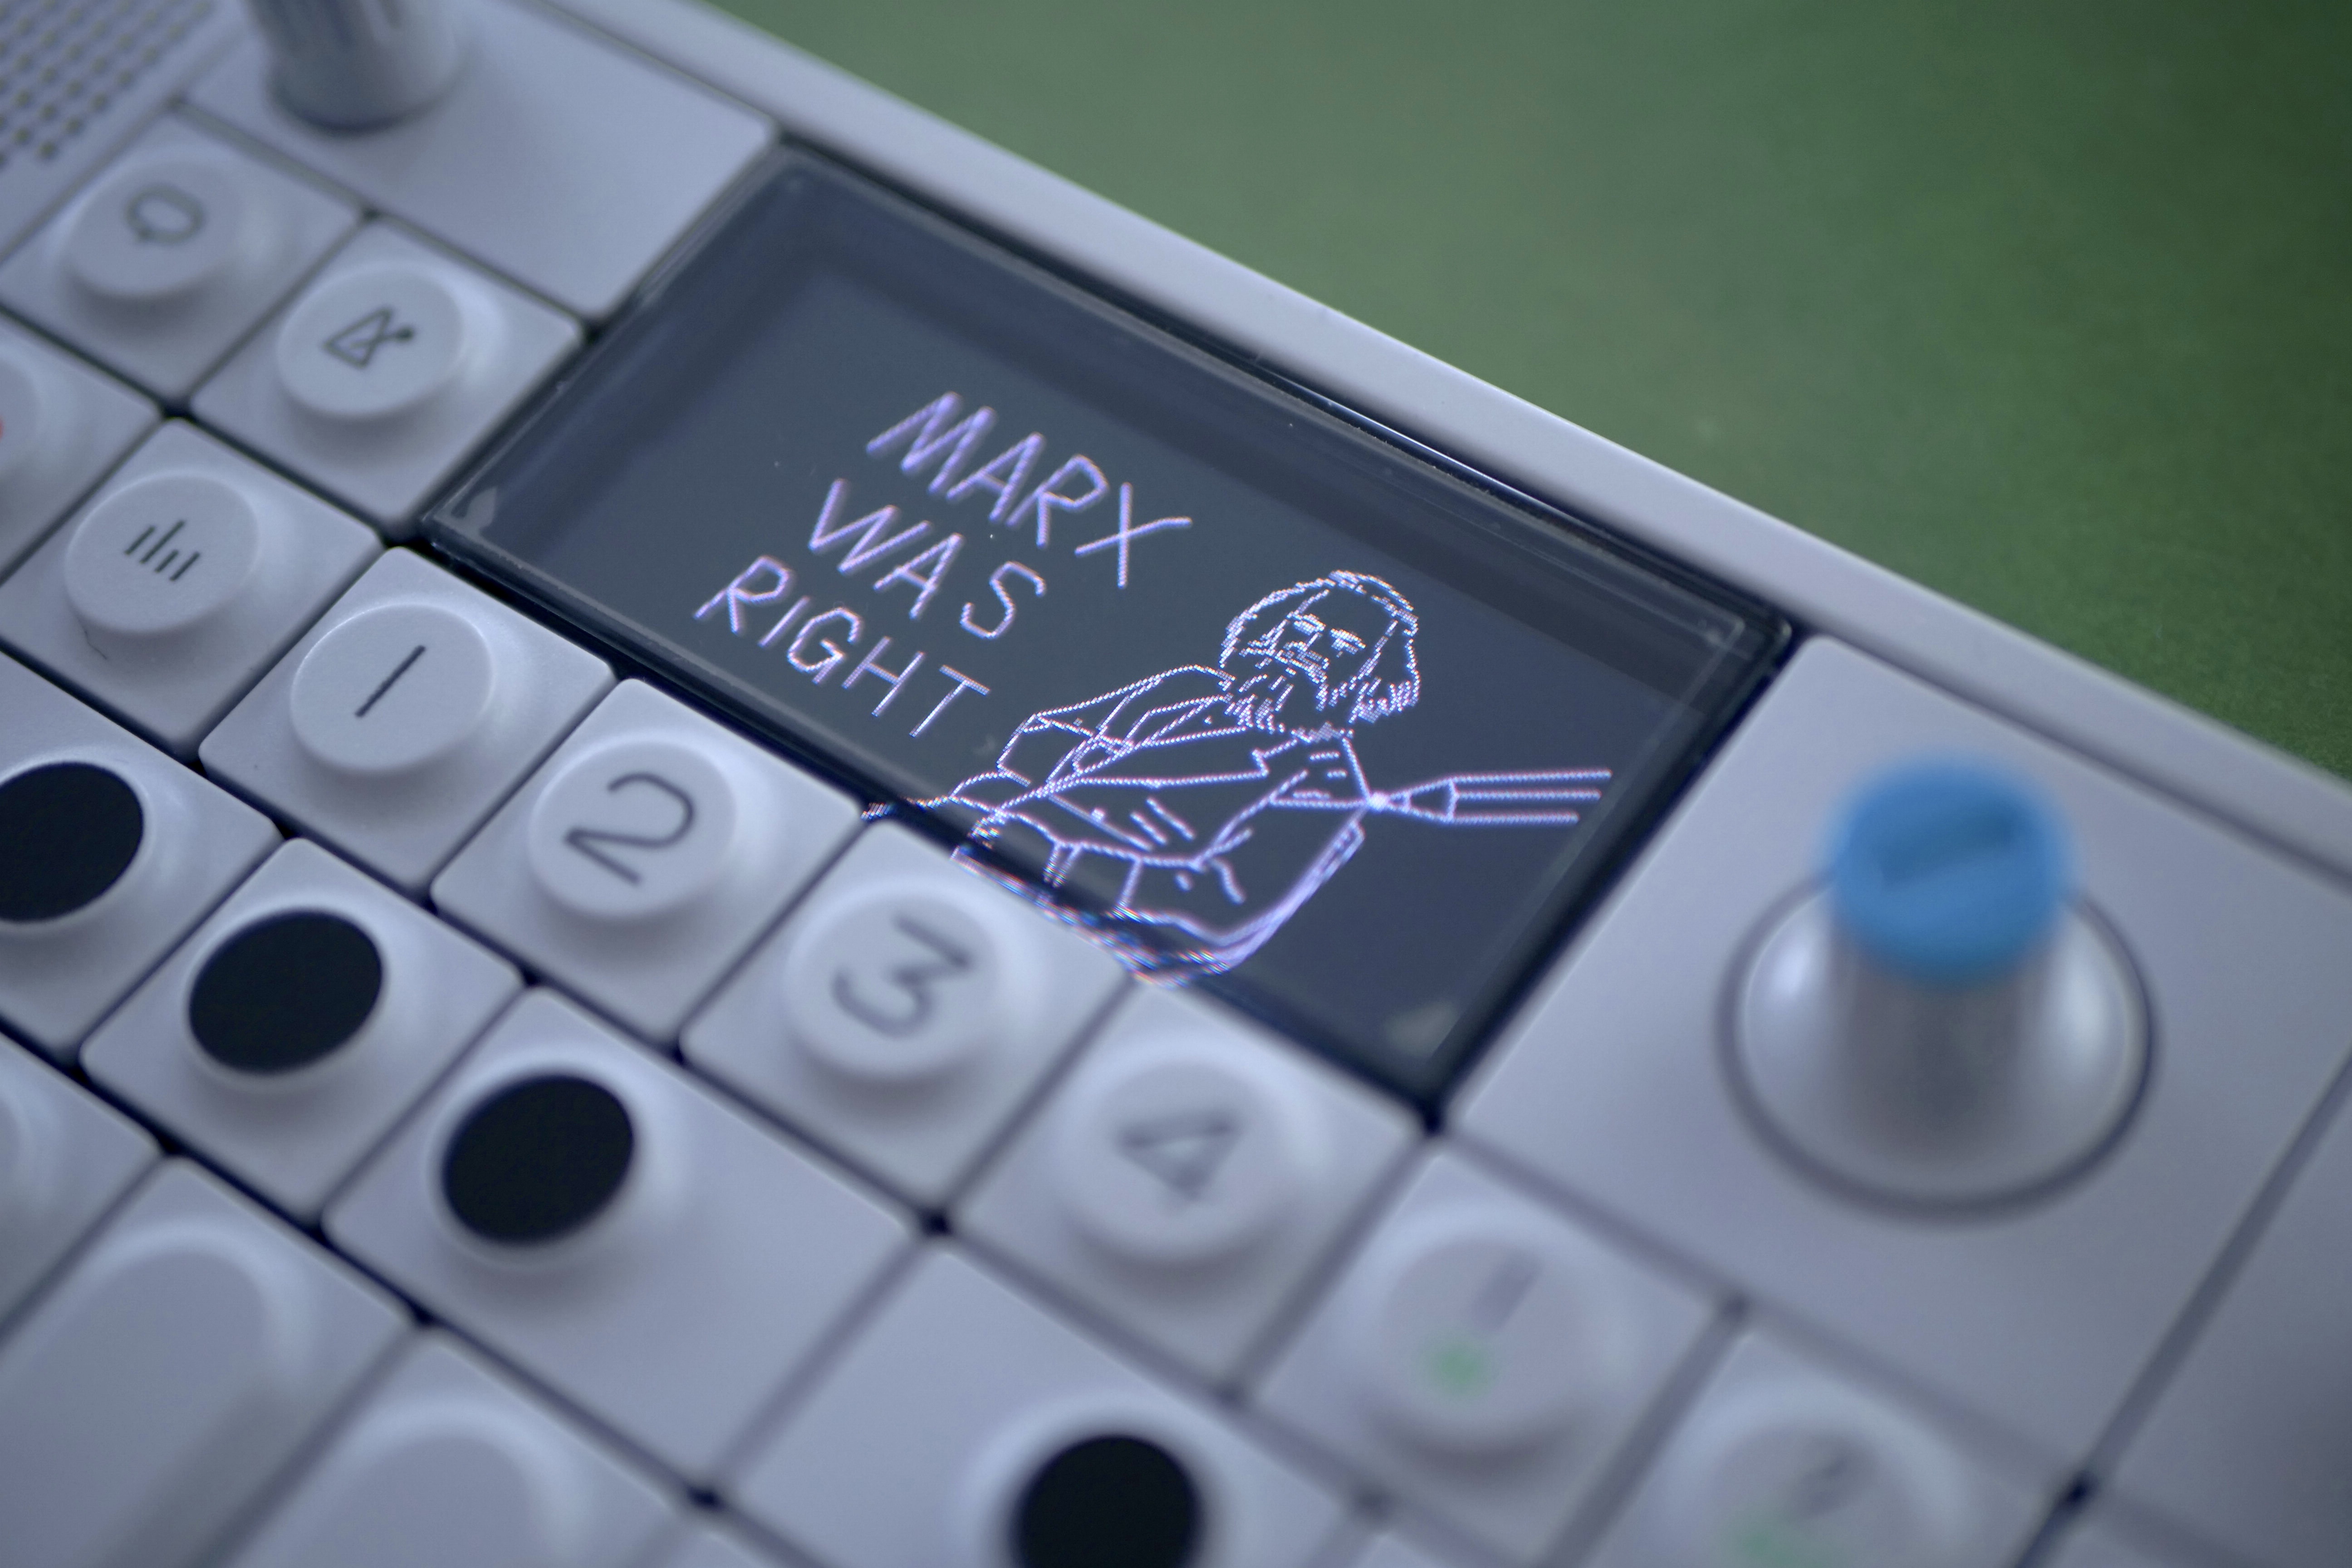 Marx Was Right! na OP-1